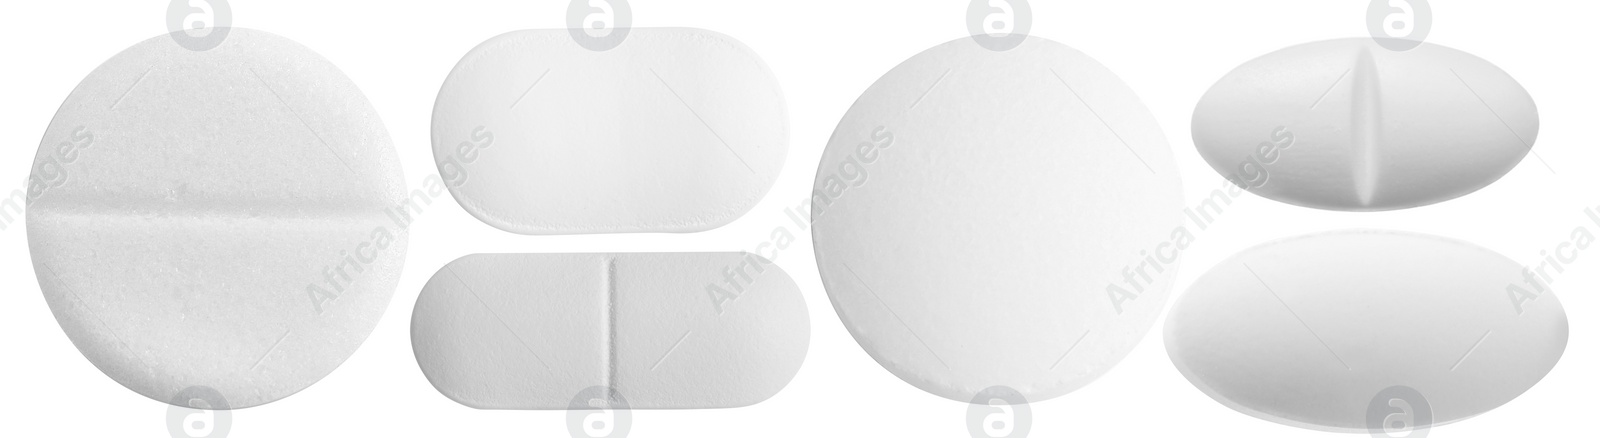 Image of Set of different pills isolated on white